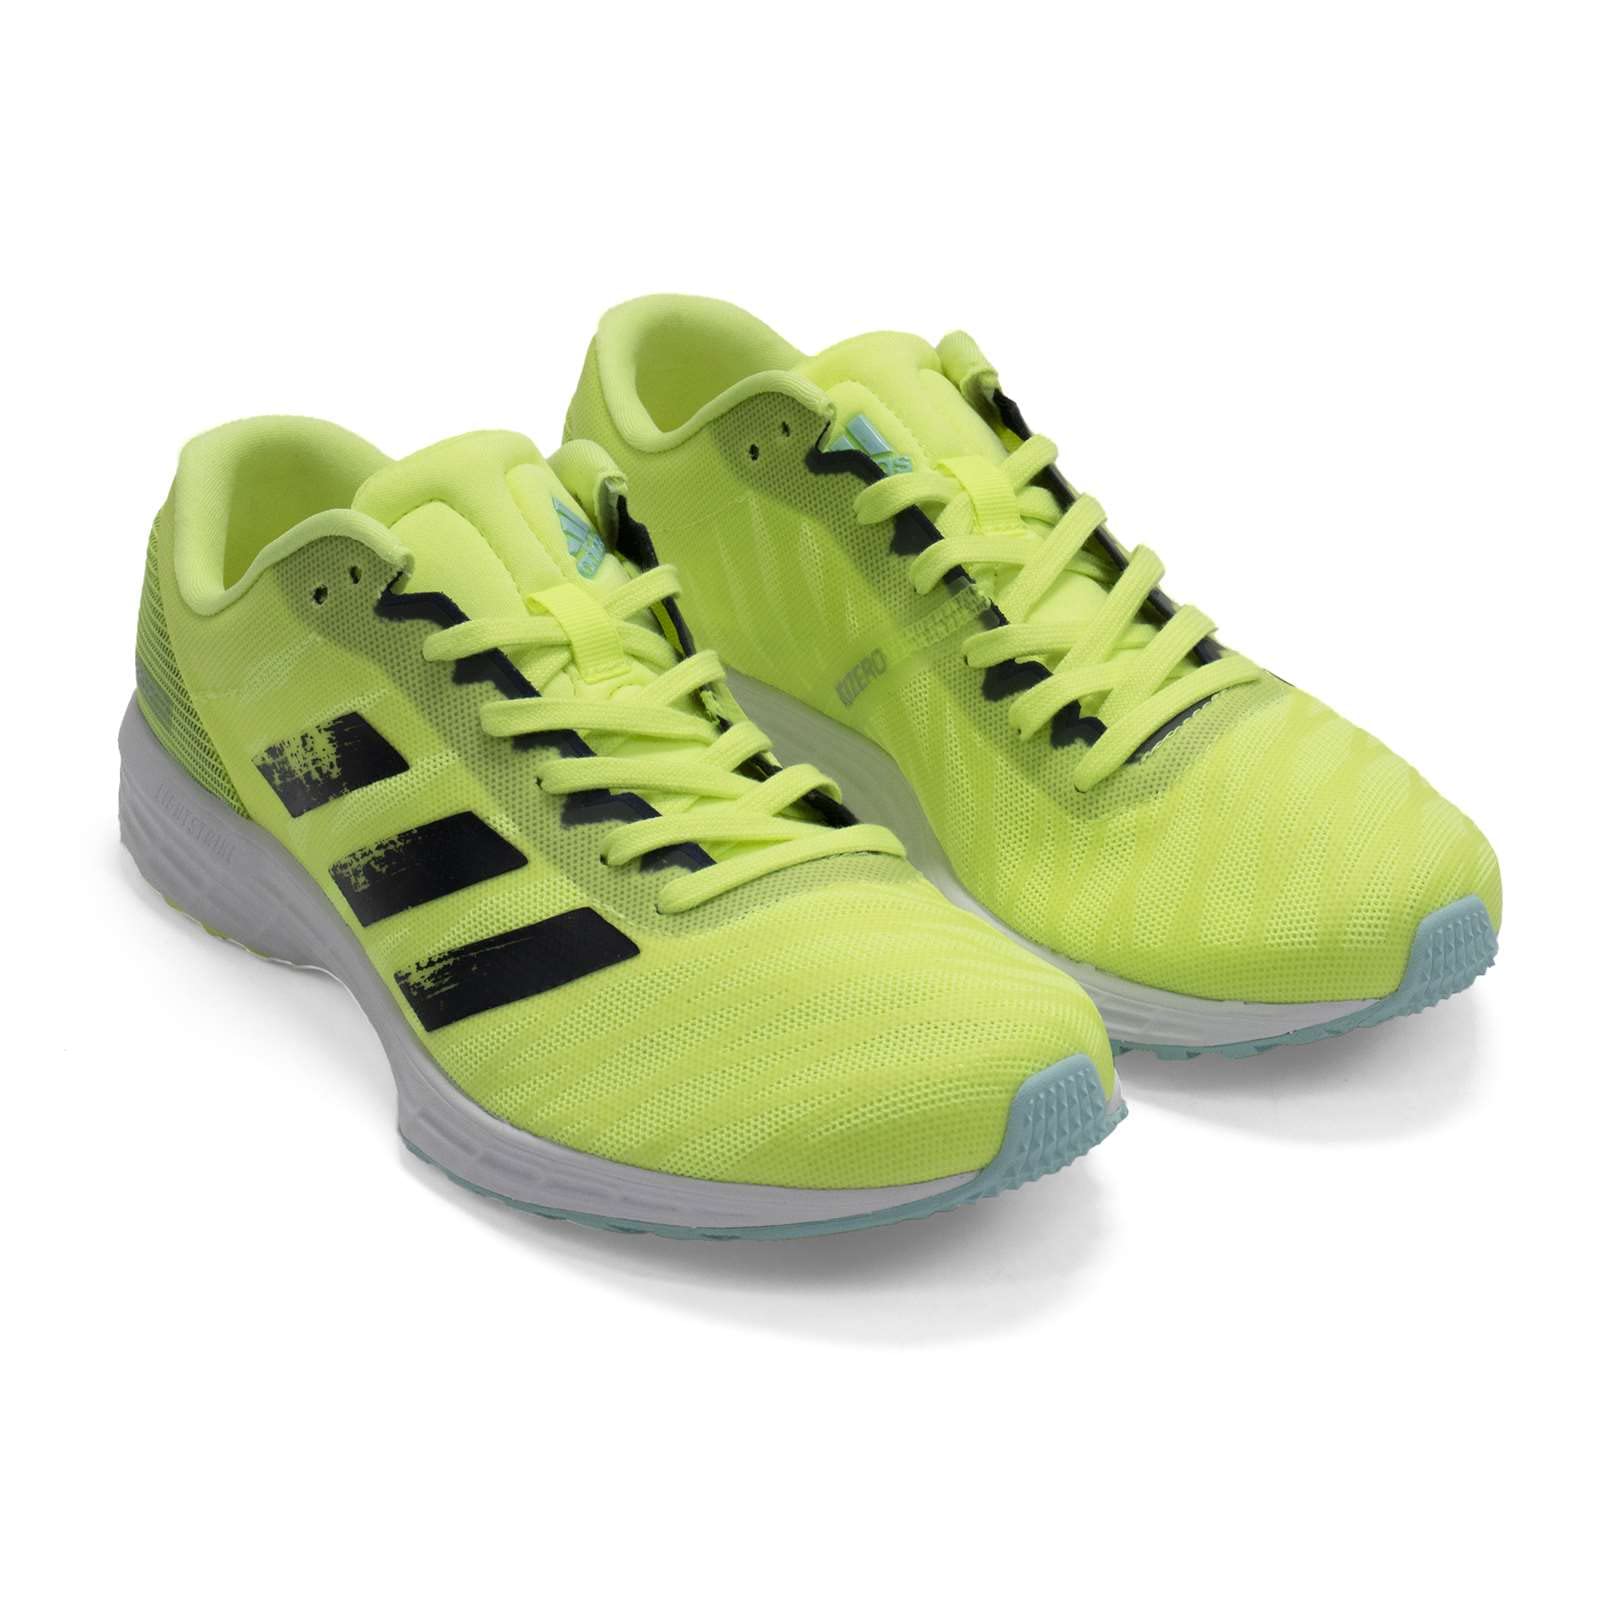 adidas Womens Adizero Rc 3 Running Sneakers Shoes - Yellow - Size 11 M